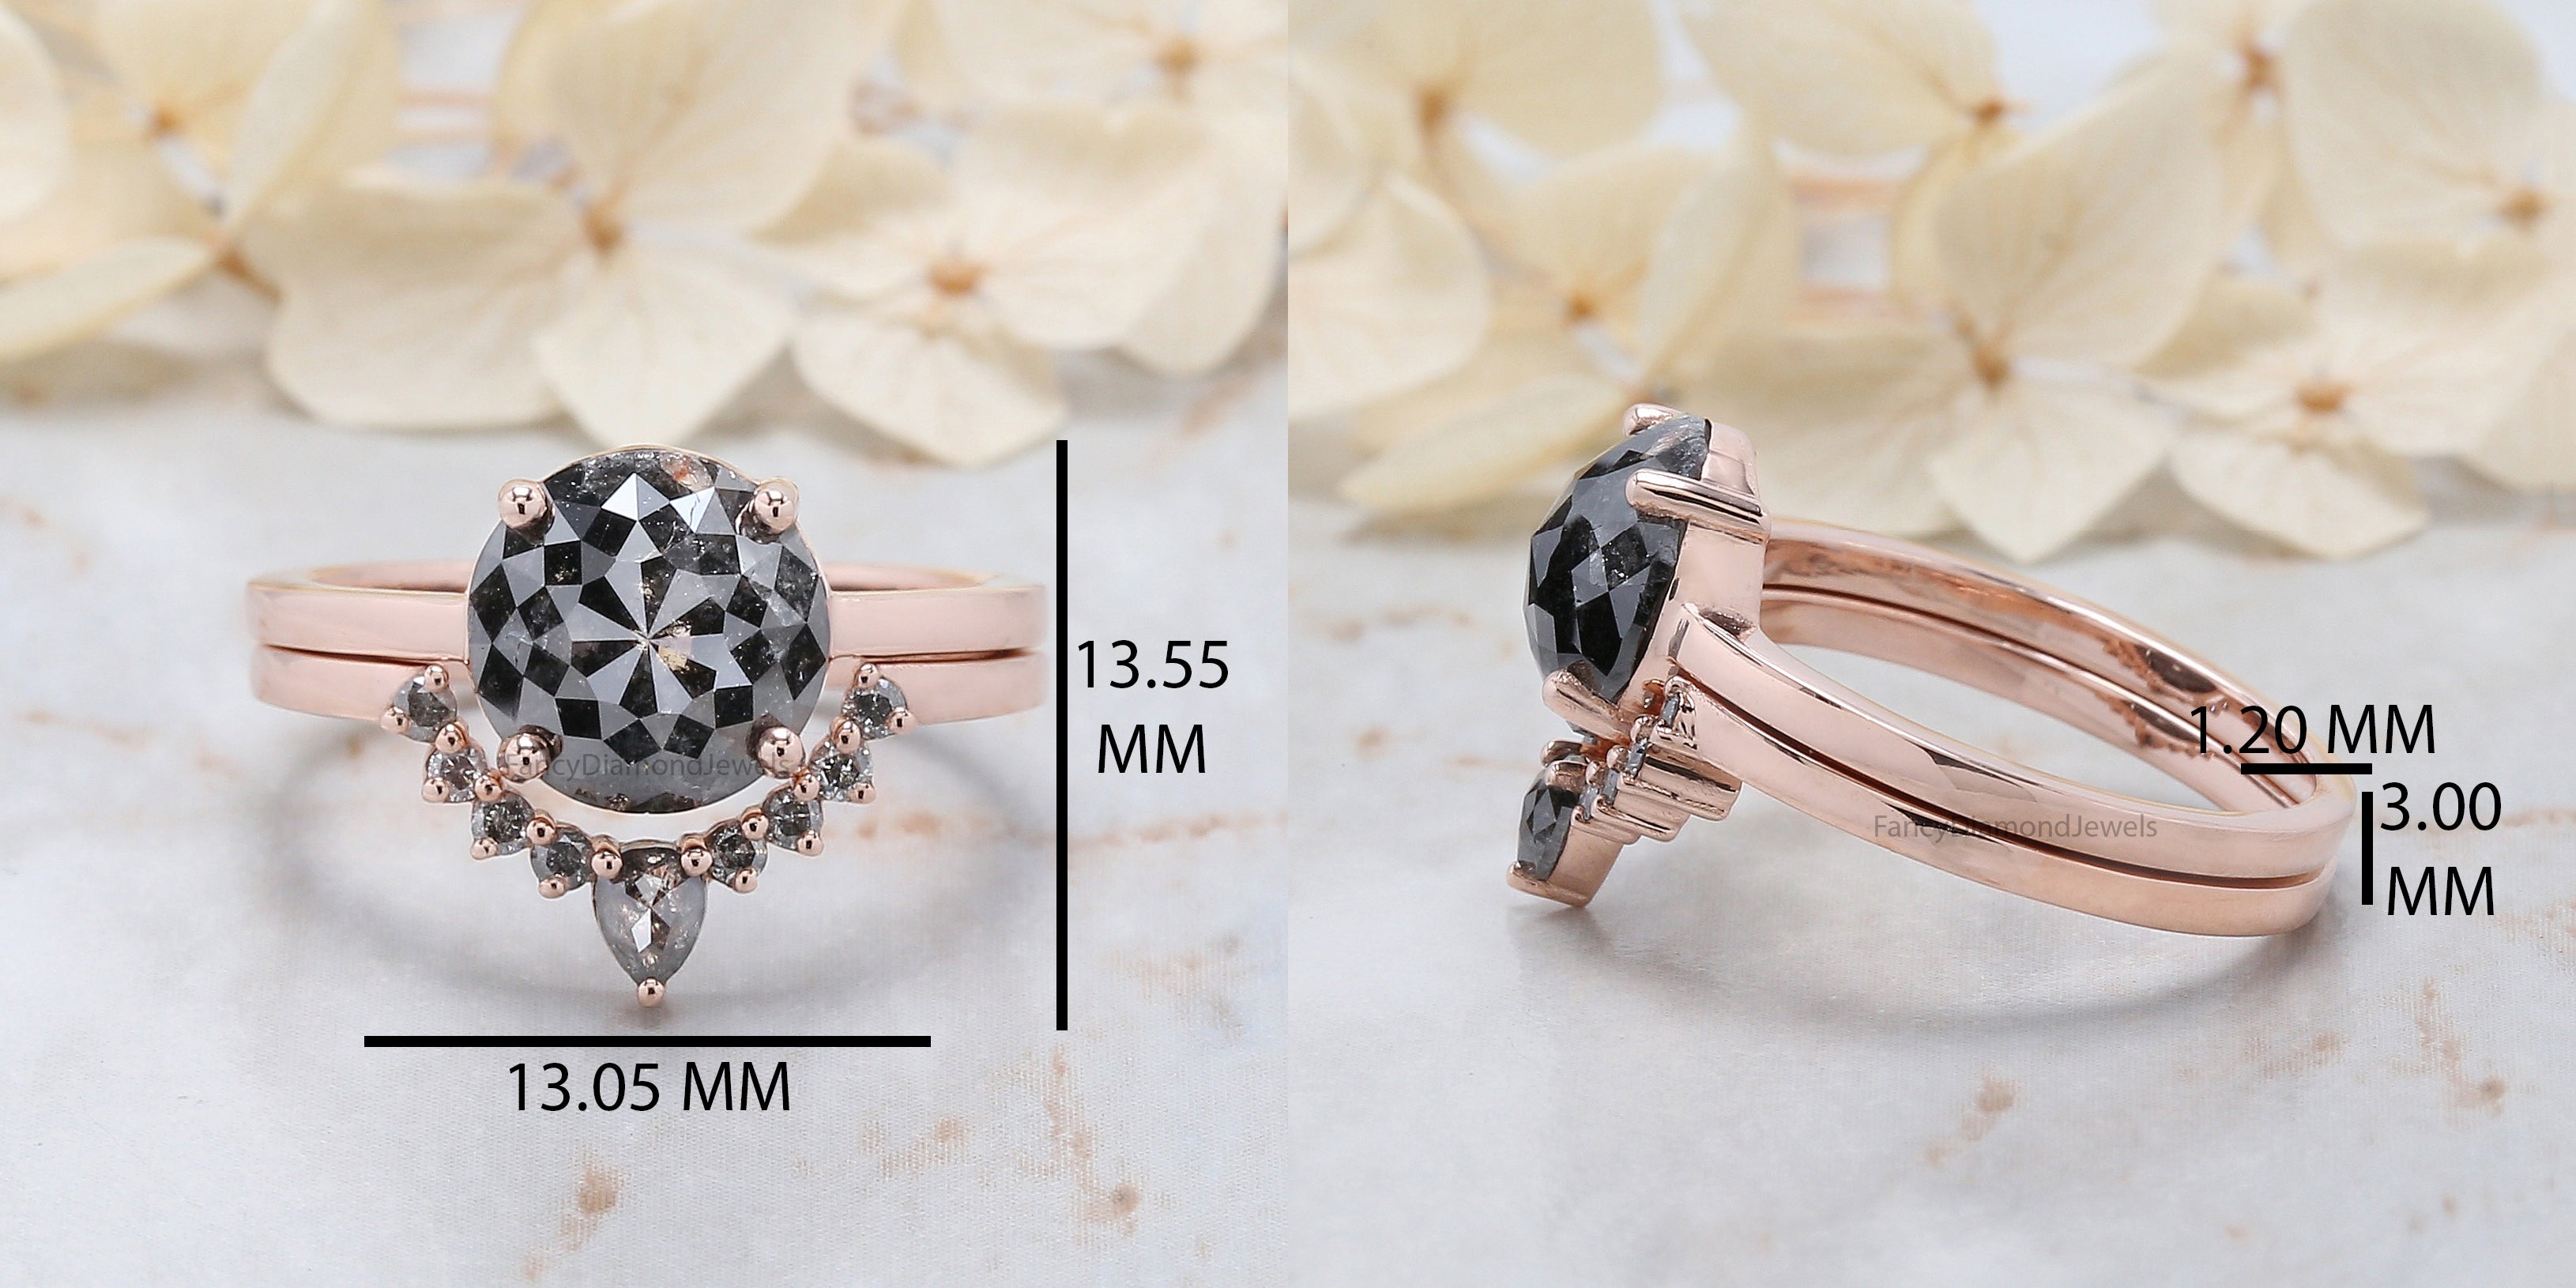 Round Rose Cut Salt And Pepper Diamond Ring 2.97 Ct 8.85 MM Round Diamond Ring 14K Solid Rose Gold Silver Engagement Ring Gift For Her QL064